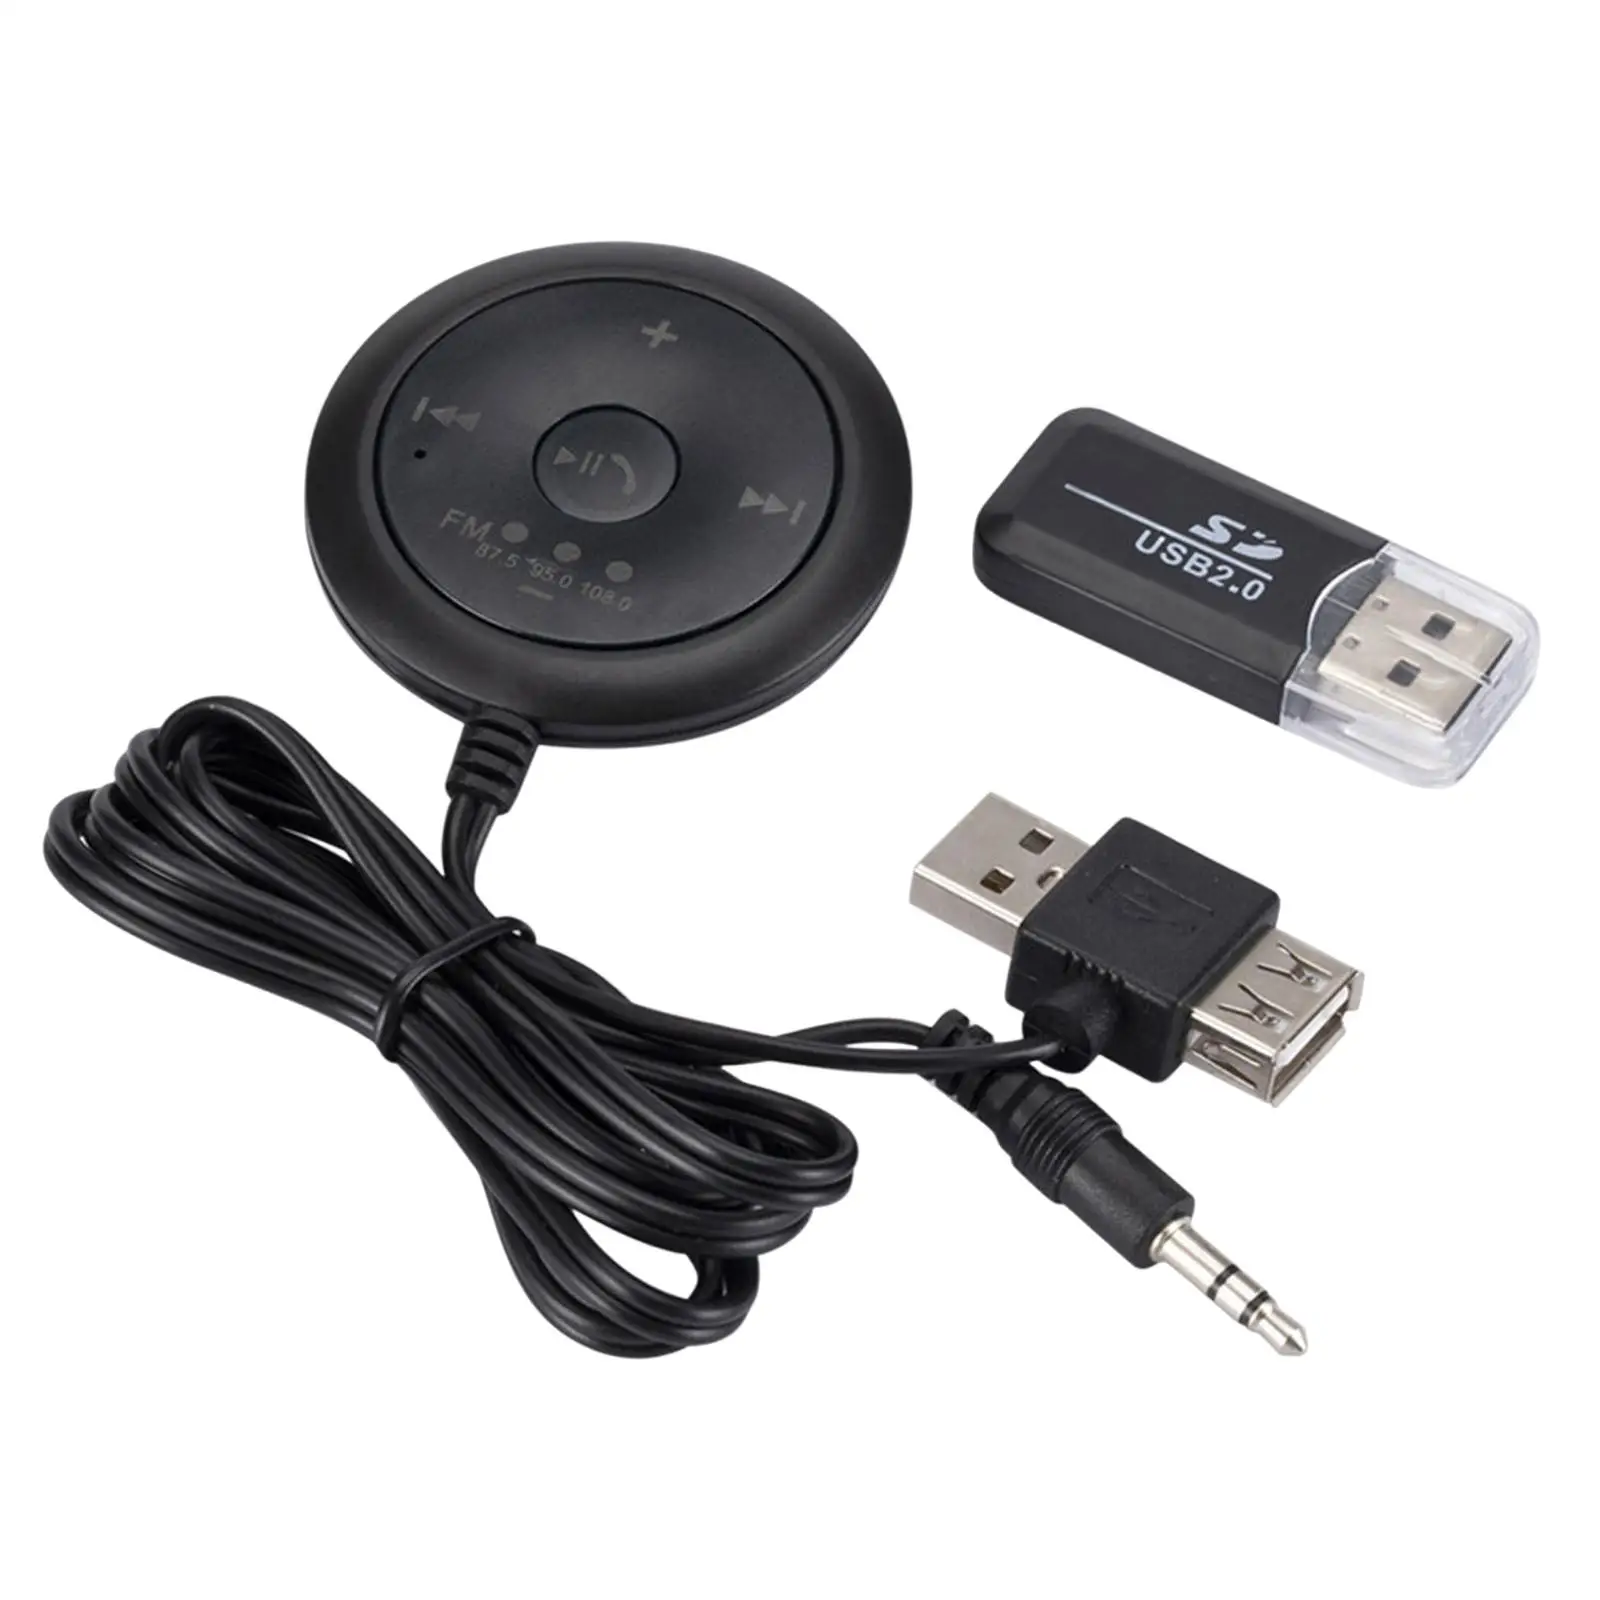 Universal Wireless Car MP3 Player Bluetooth Audio ABS Set Upgraded Kit Transmitter Receiver Adapter for Car Stereo FM Radio PC